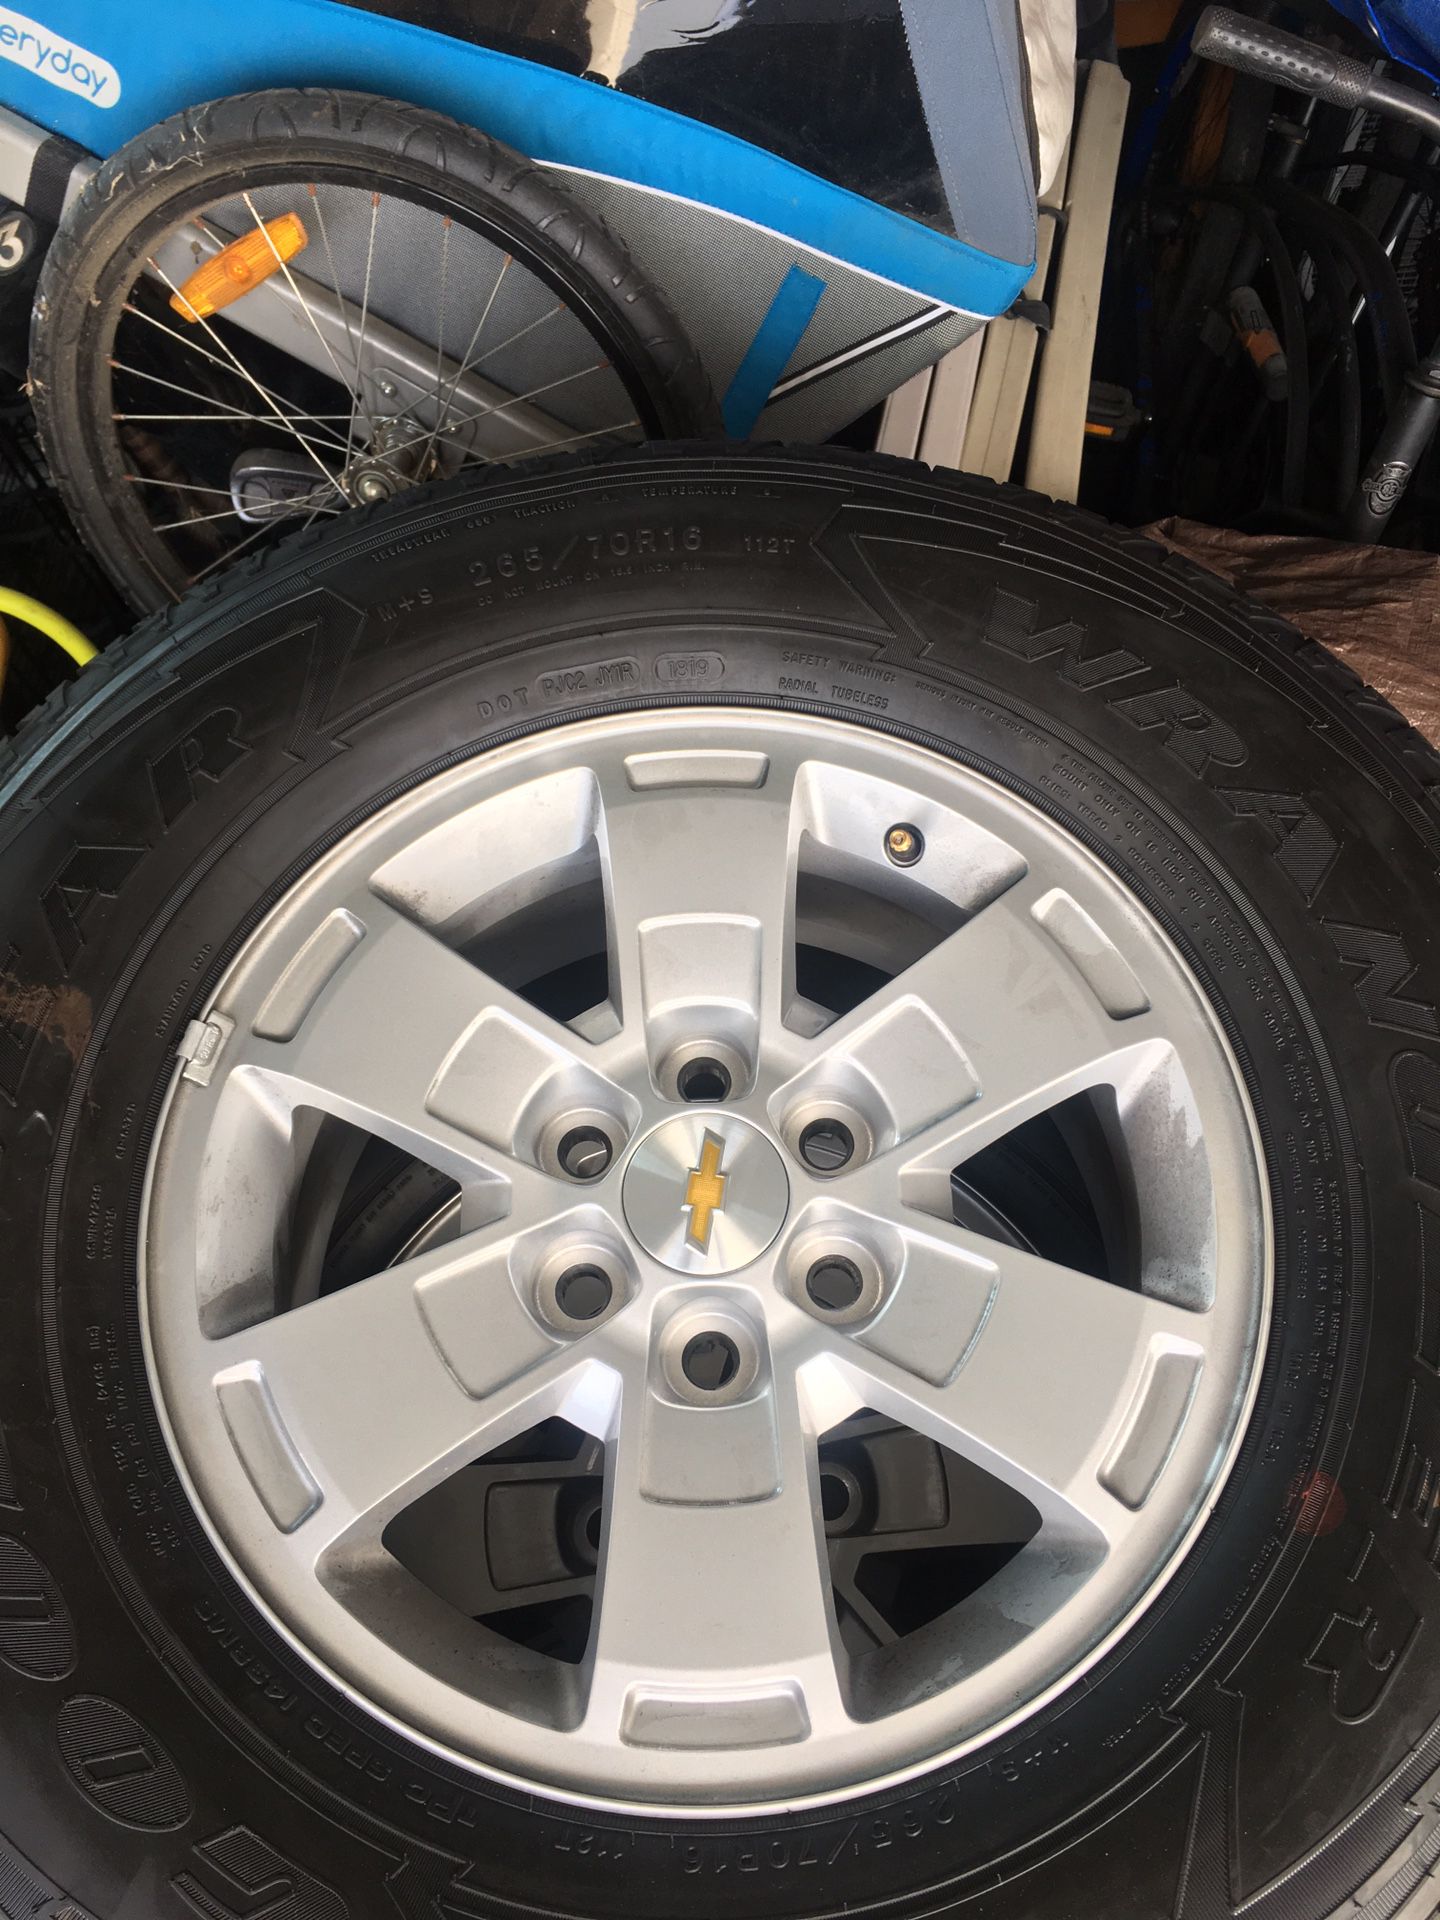 Tires and Rims, brand new take offs from 2019 Chevy Colorado. Goodyear Wrangler 16”